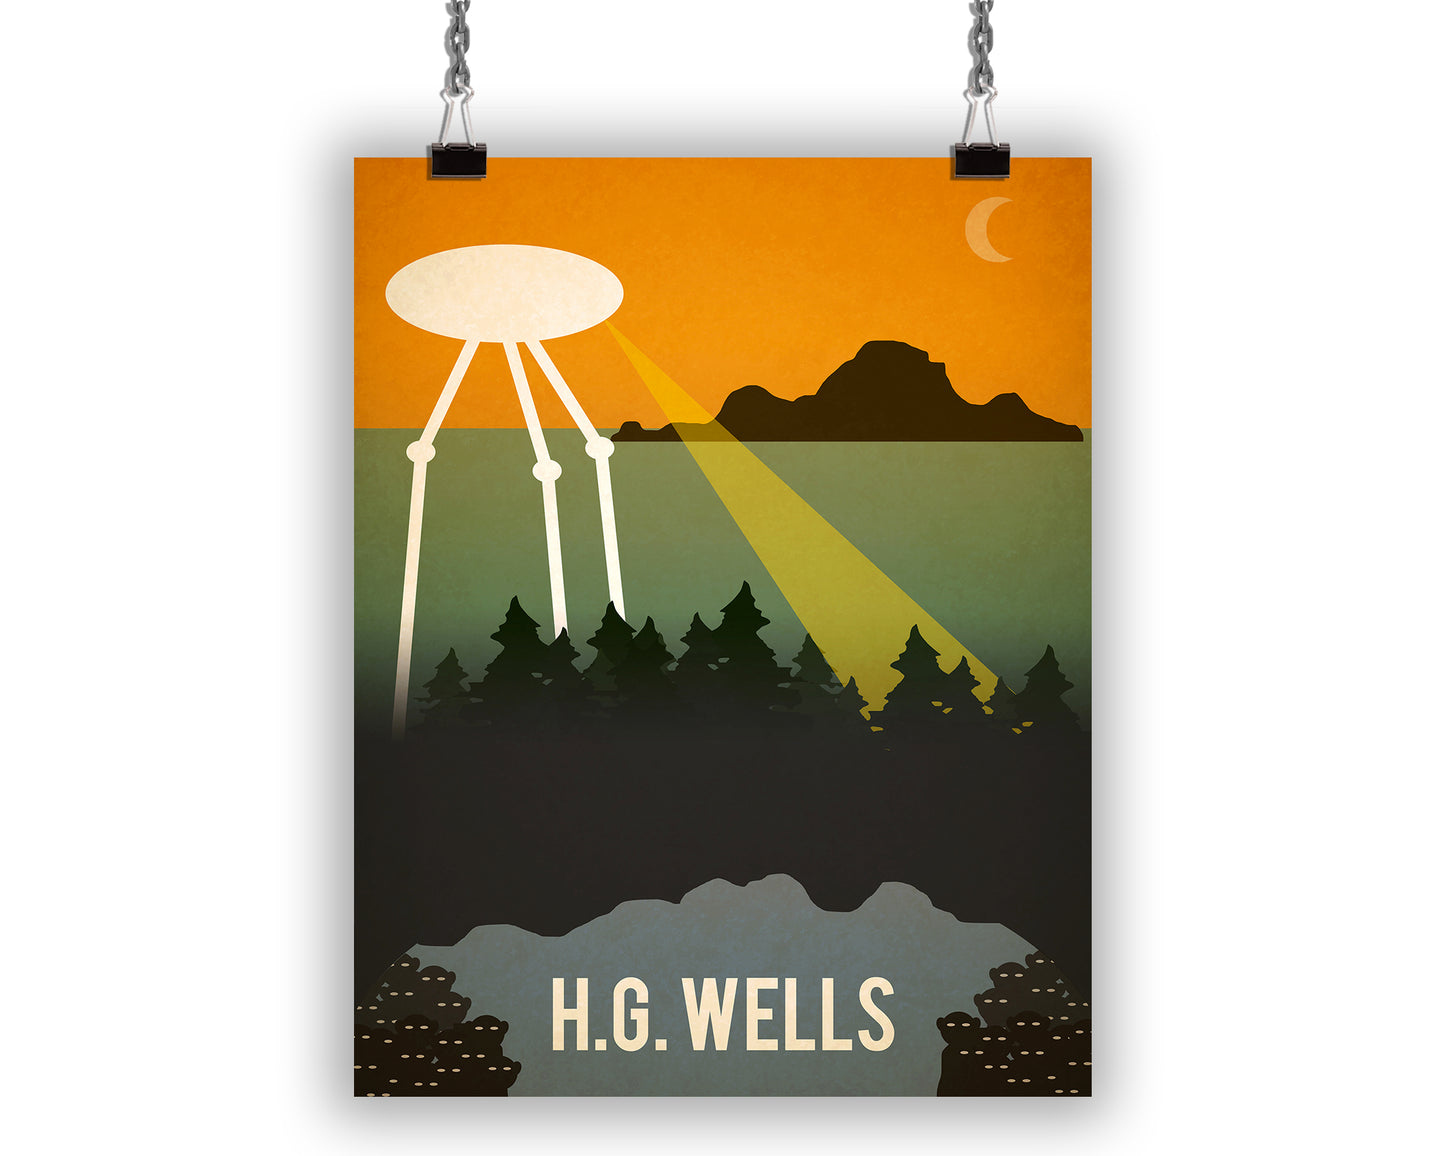 HG Wells Art Print for science fiction fans and book lovers